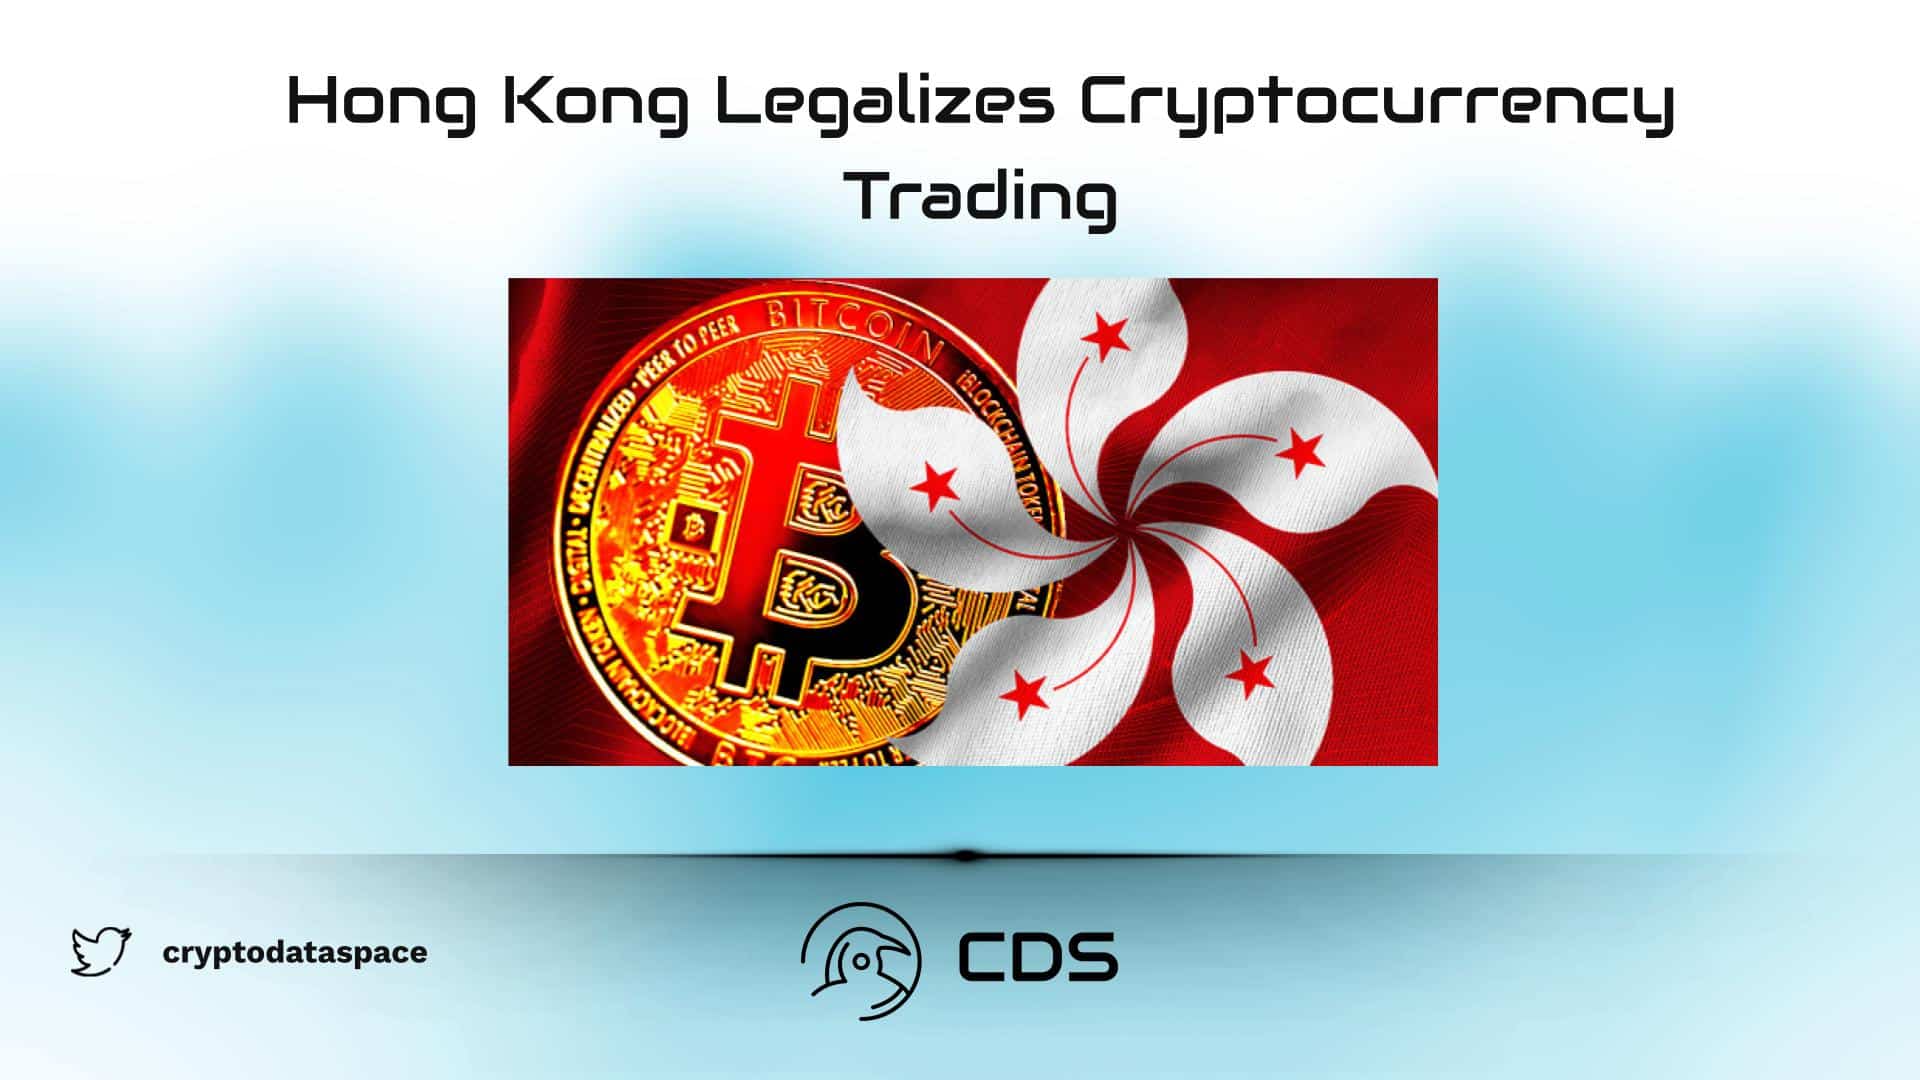 Hong Kong Legalizes Cryptocurrency Trading